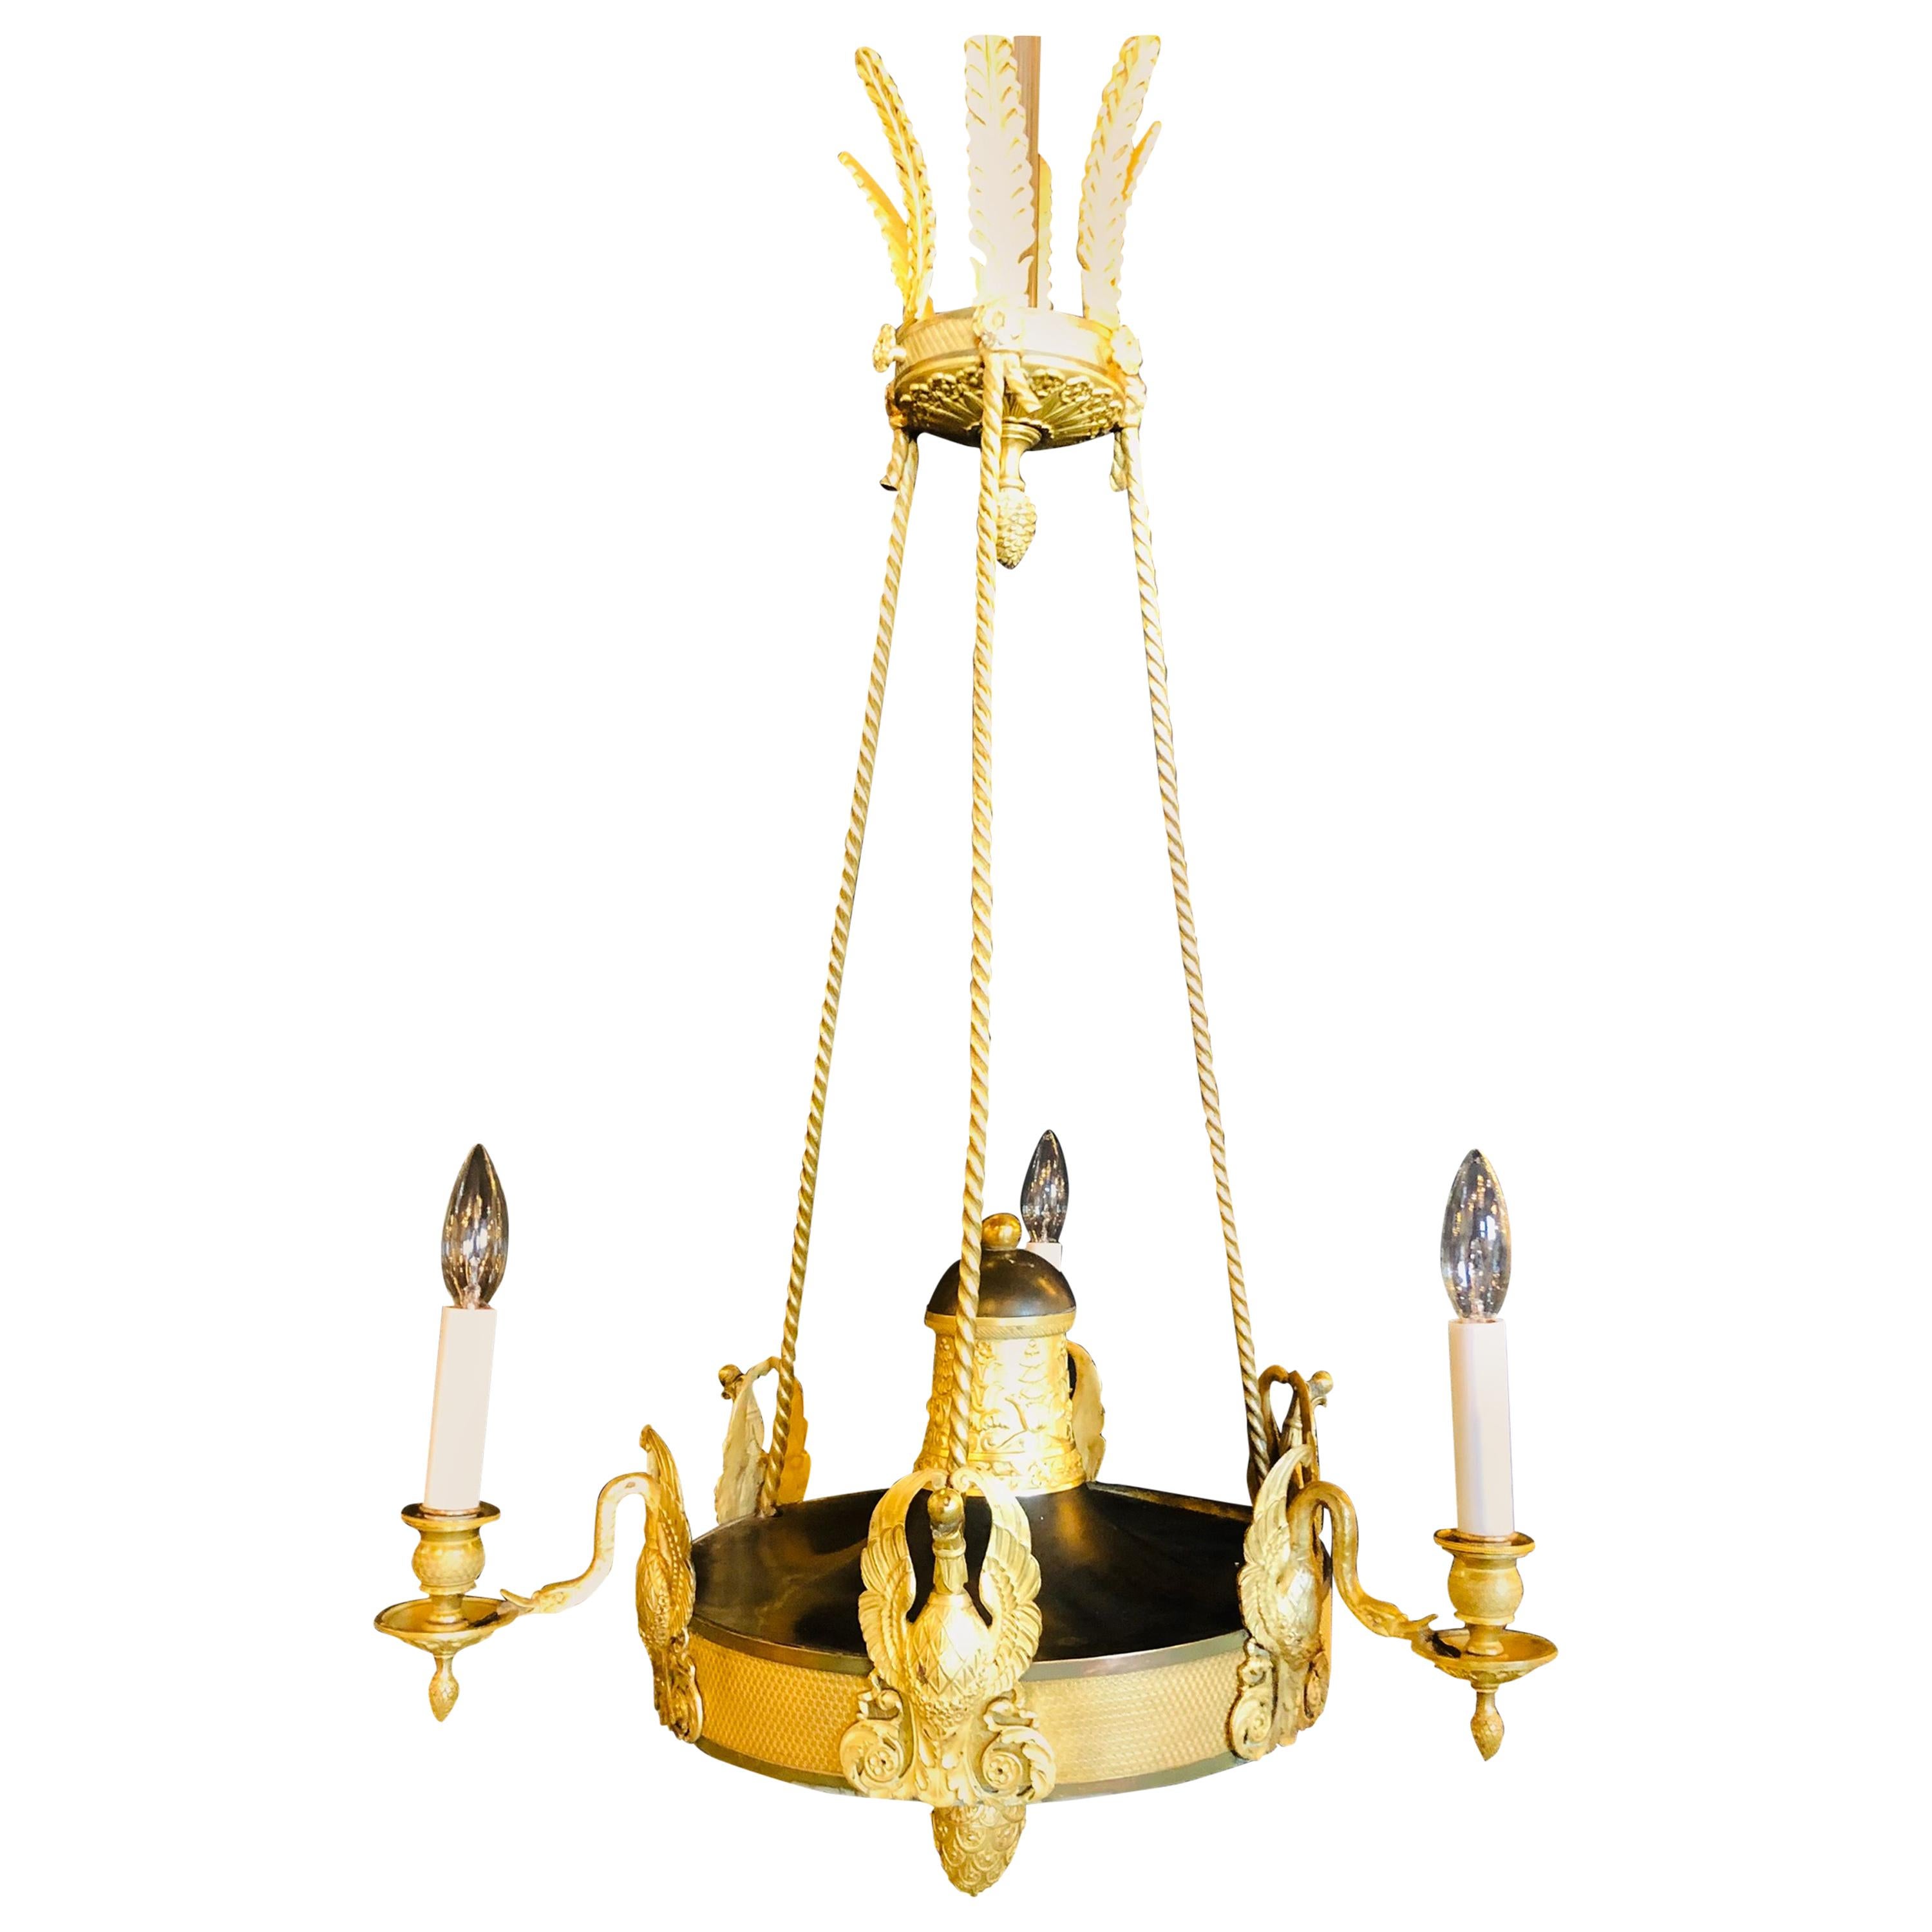 19th Century Empire Chandelier with Full Figure Swan Arms